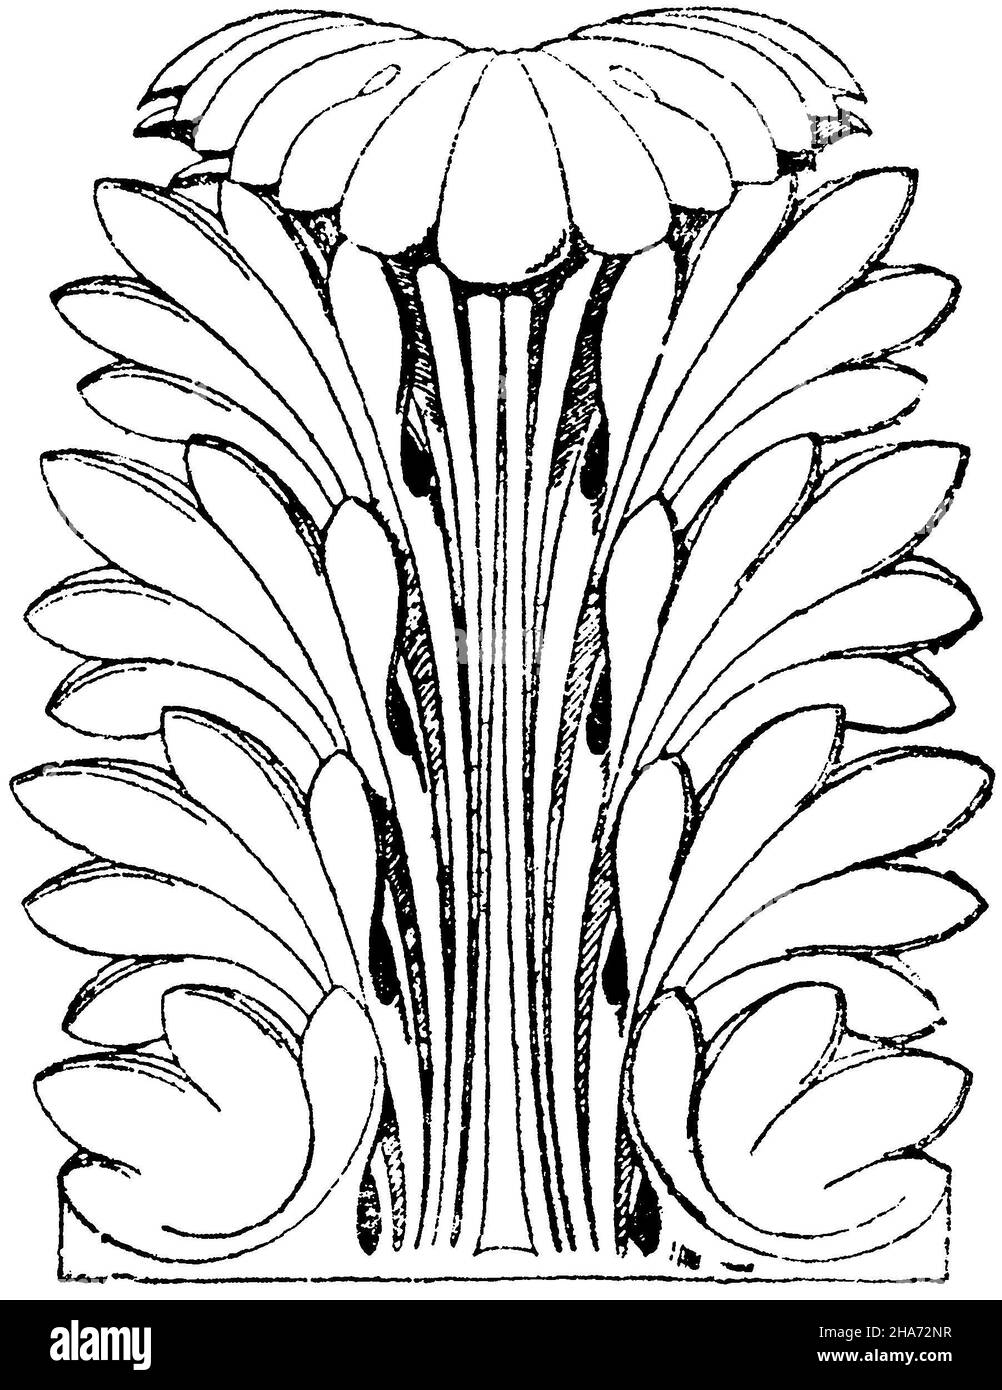 Acanthus leaf: Roman acanthus leaf. The model is borrowed from a column capital from the Pantheon in Rome. Characteristic and calculated for the effect of distance are the spoon-shaped roundings and hollows of the leaf tips, as well as the deep incisions in the leaf angles., ,  (pattern book, ) Stock Photo